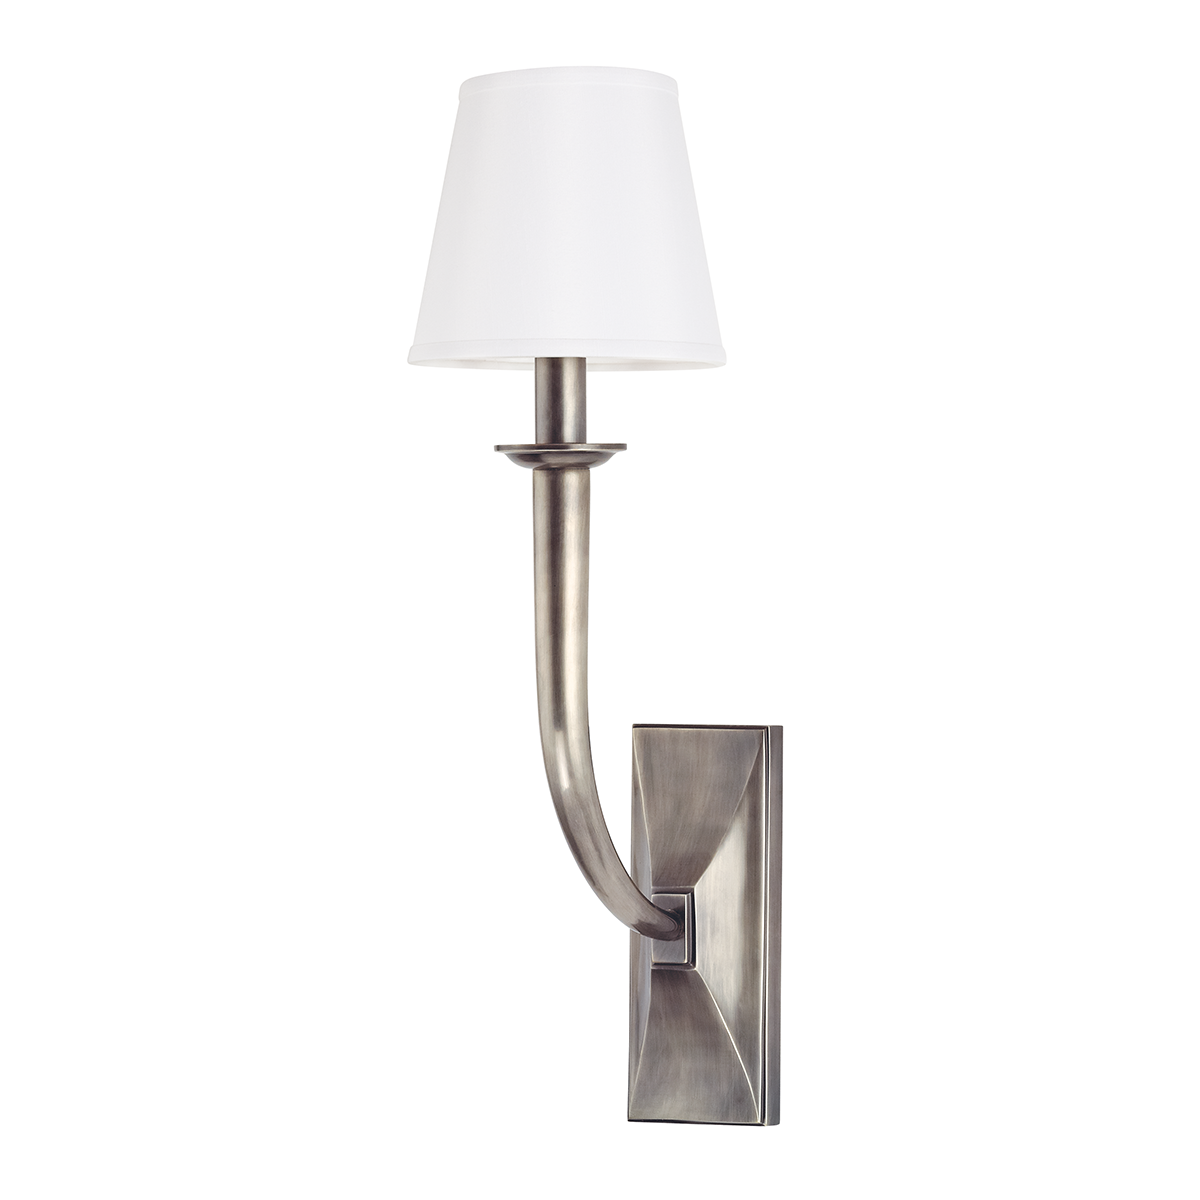 Vienna 1 Light Wall Sconce White Shade